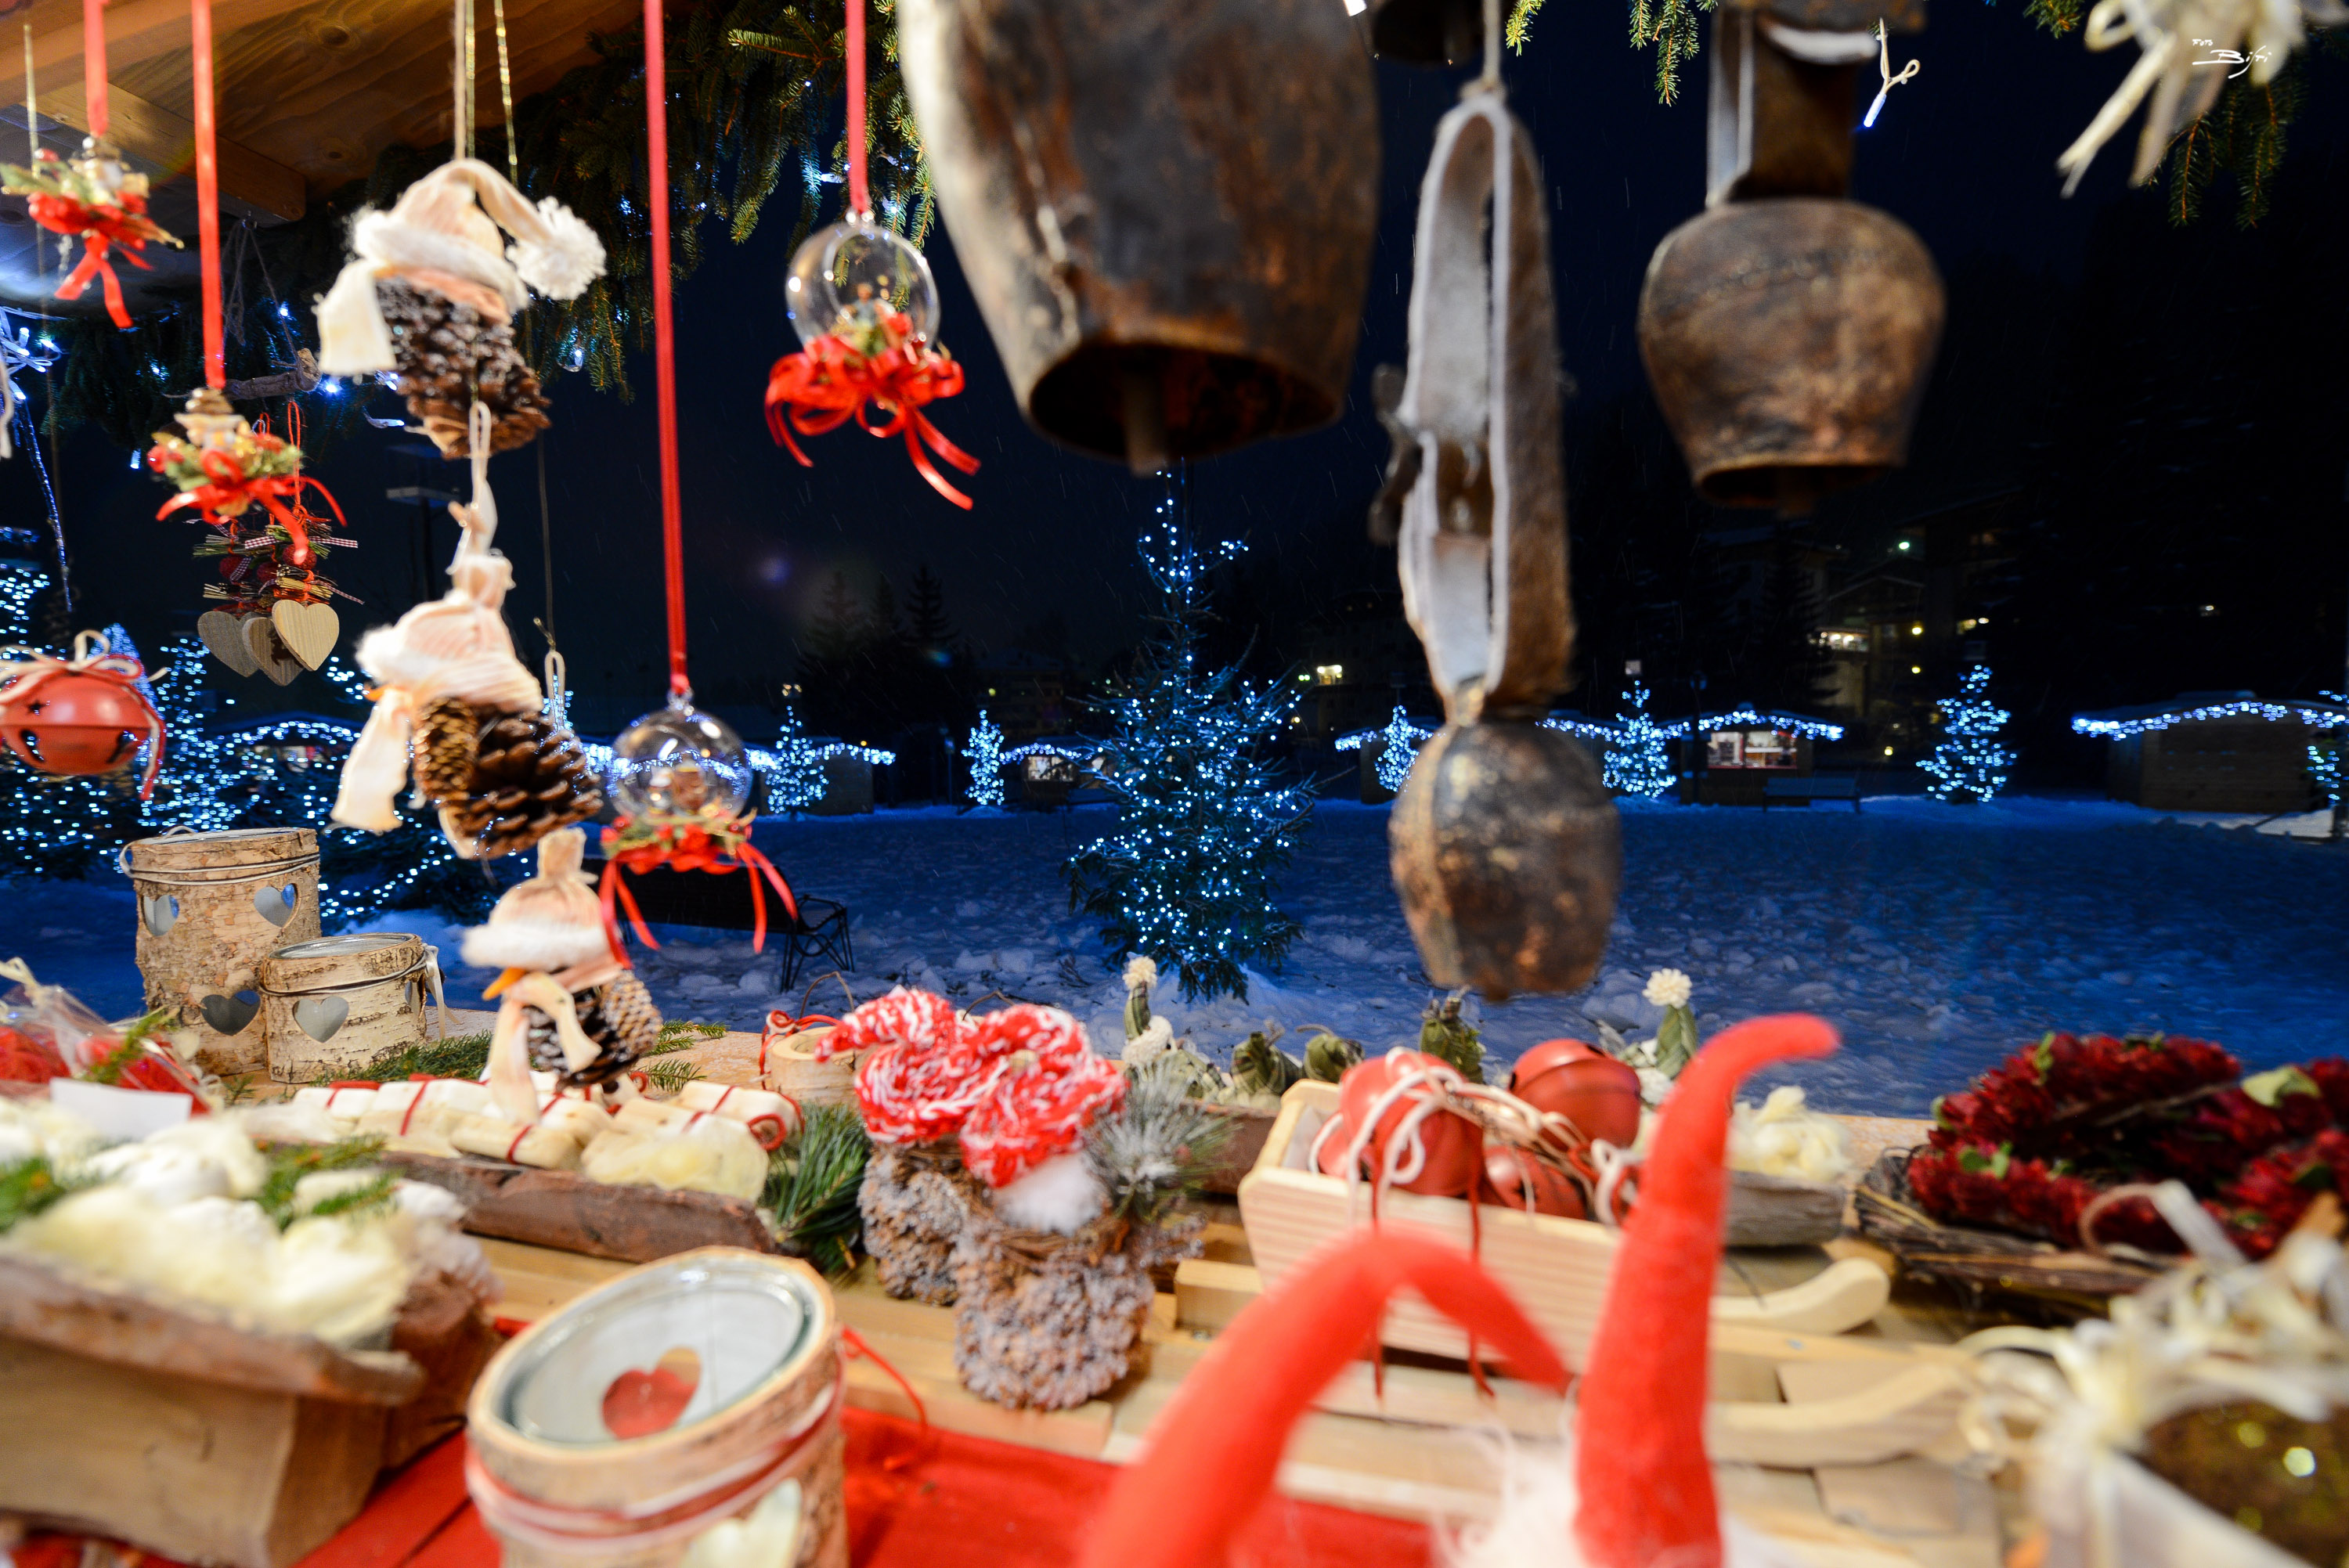 Gifts on sale at Madonna di Campiglio Christmas market